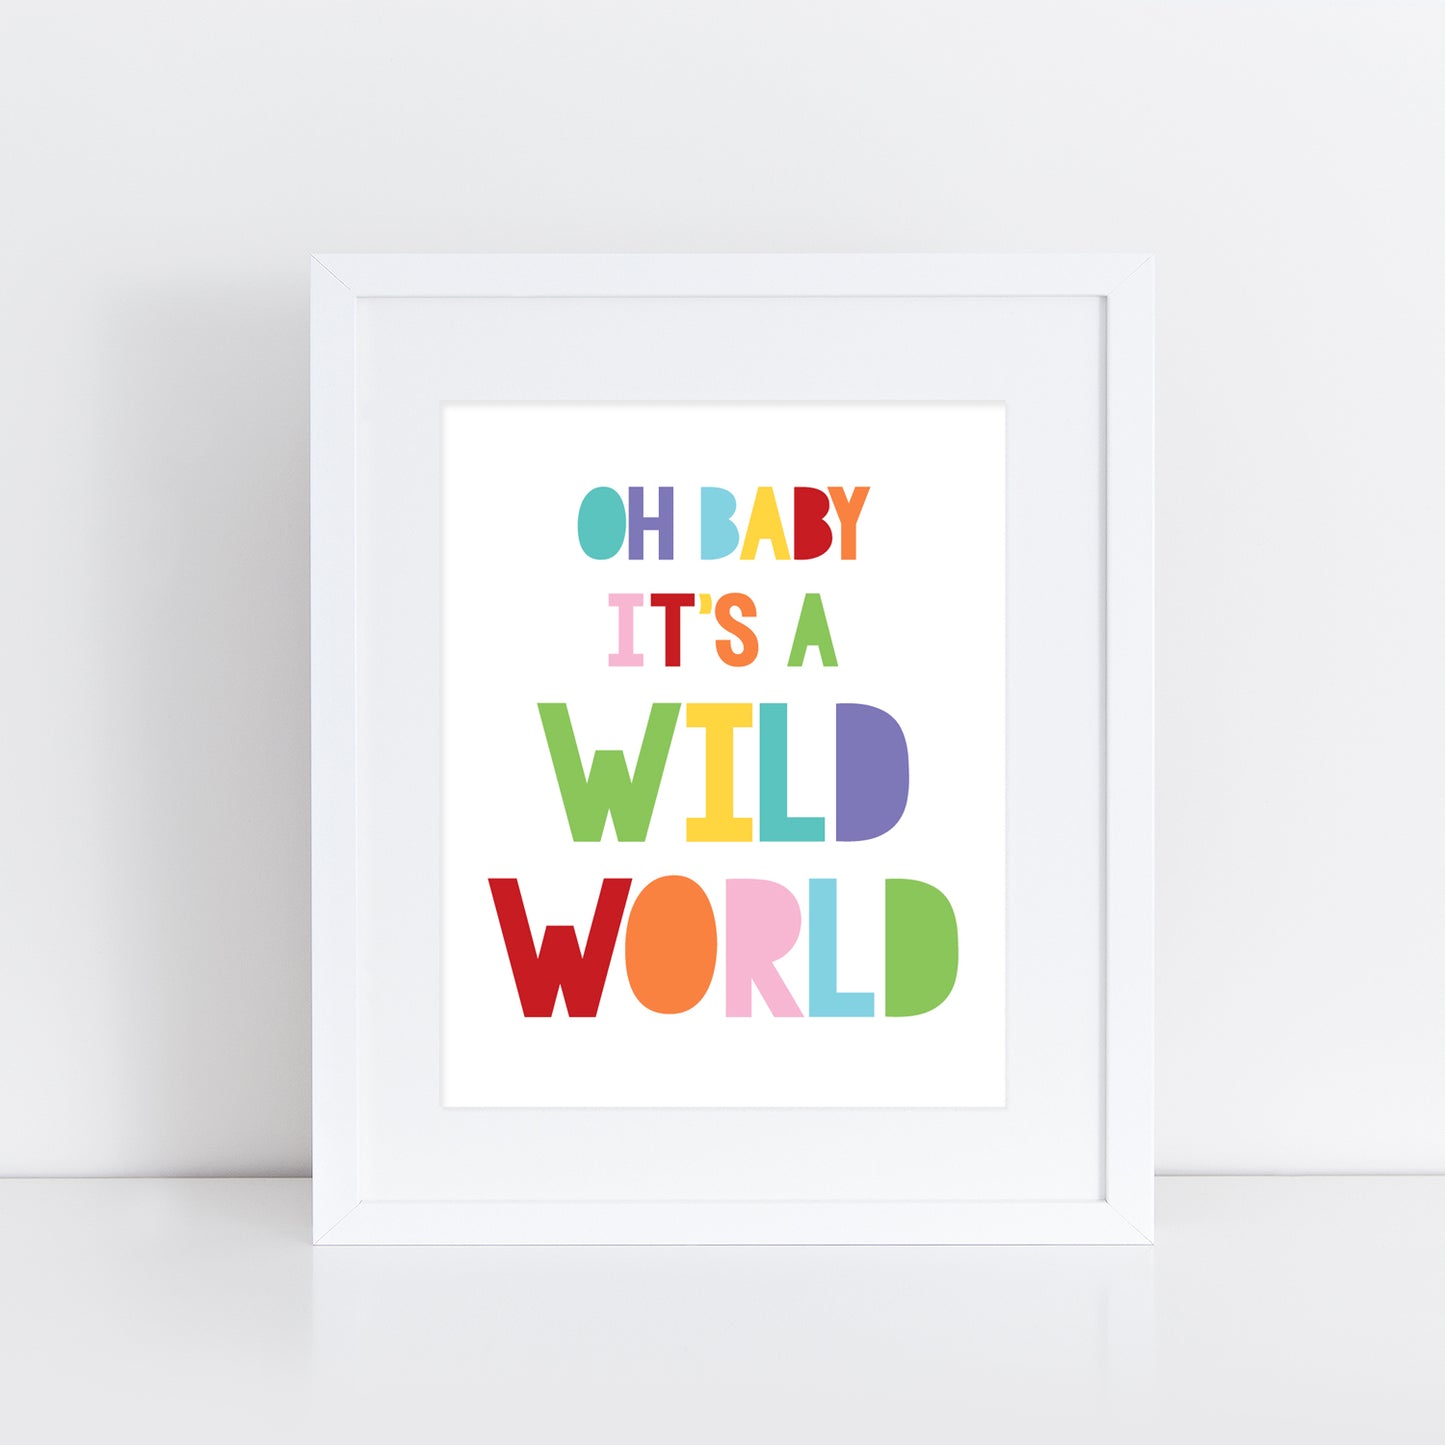 olourful typographic poster OH BABY IT'S A WILD WORLD